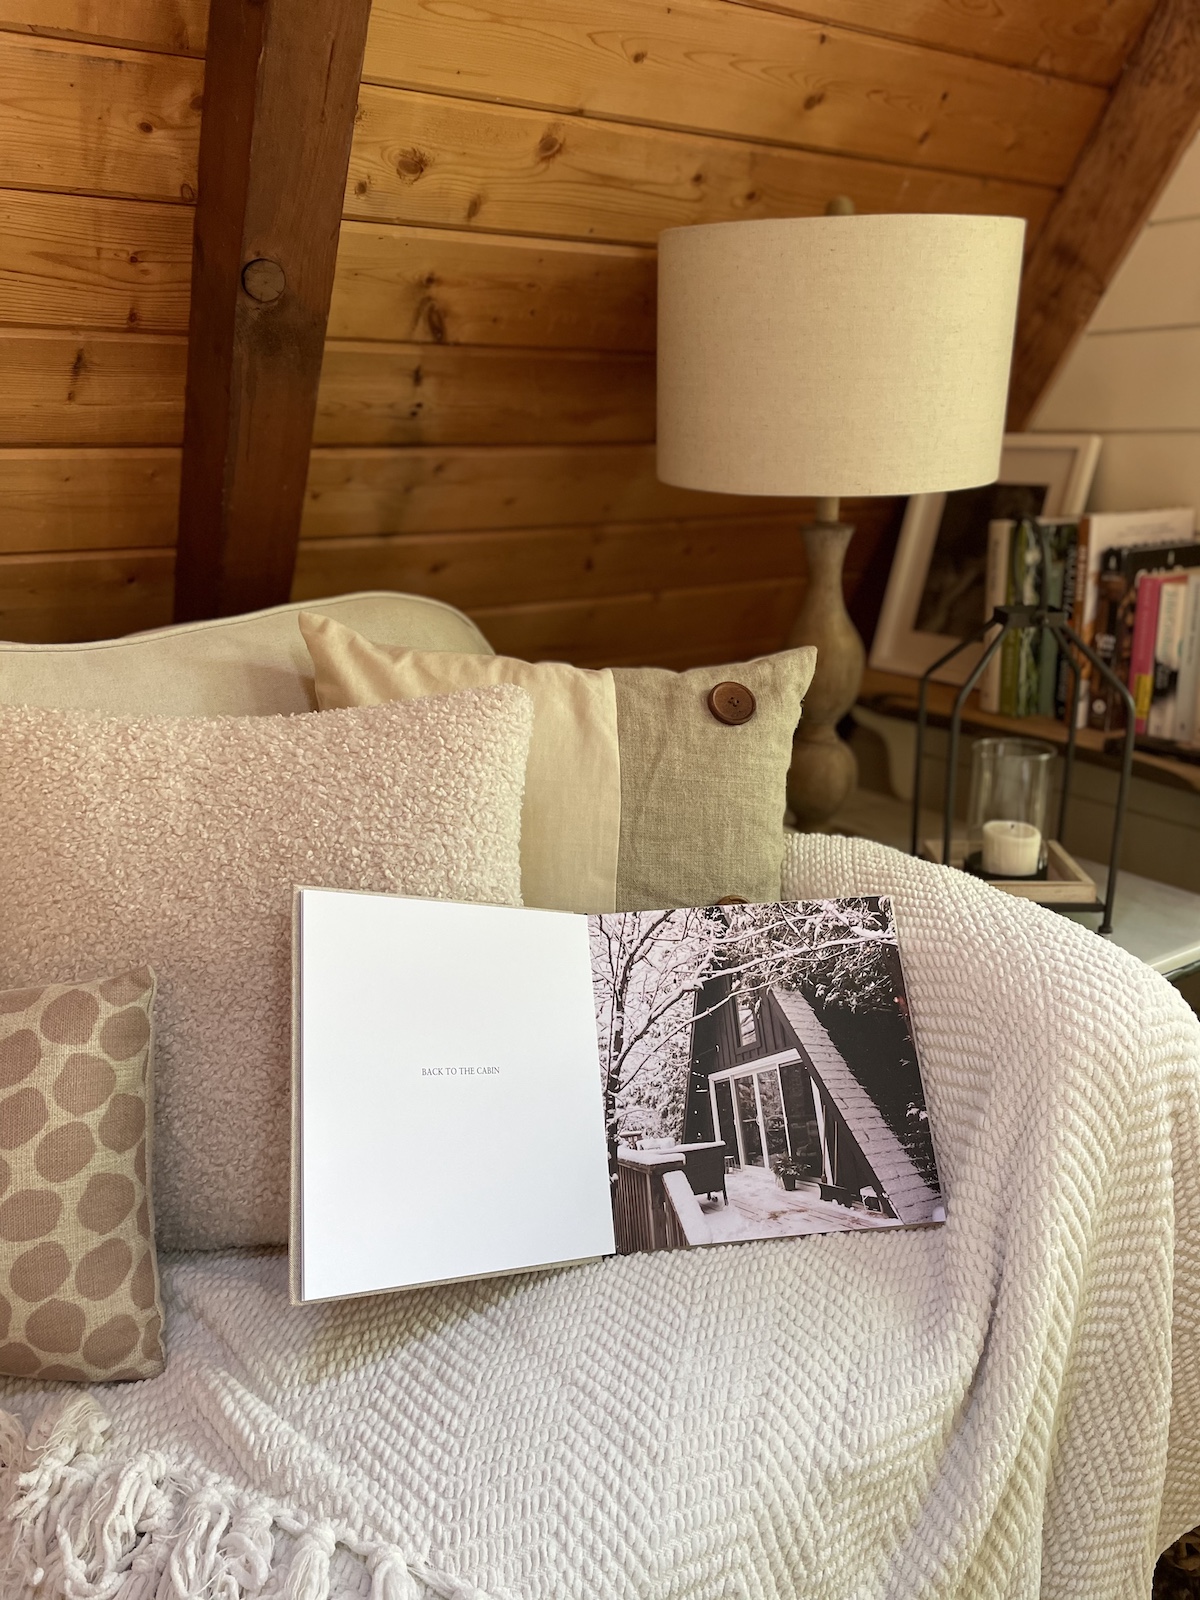 Photo book of a cabin, open on a chair